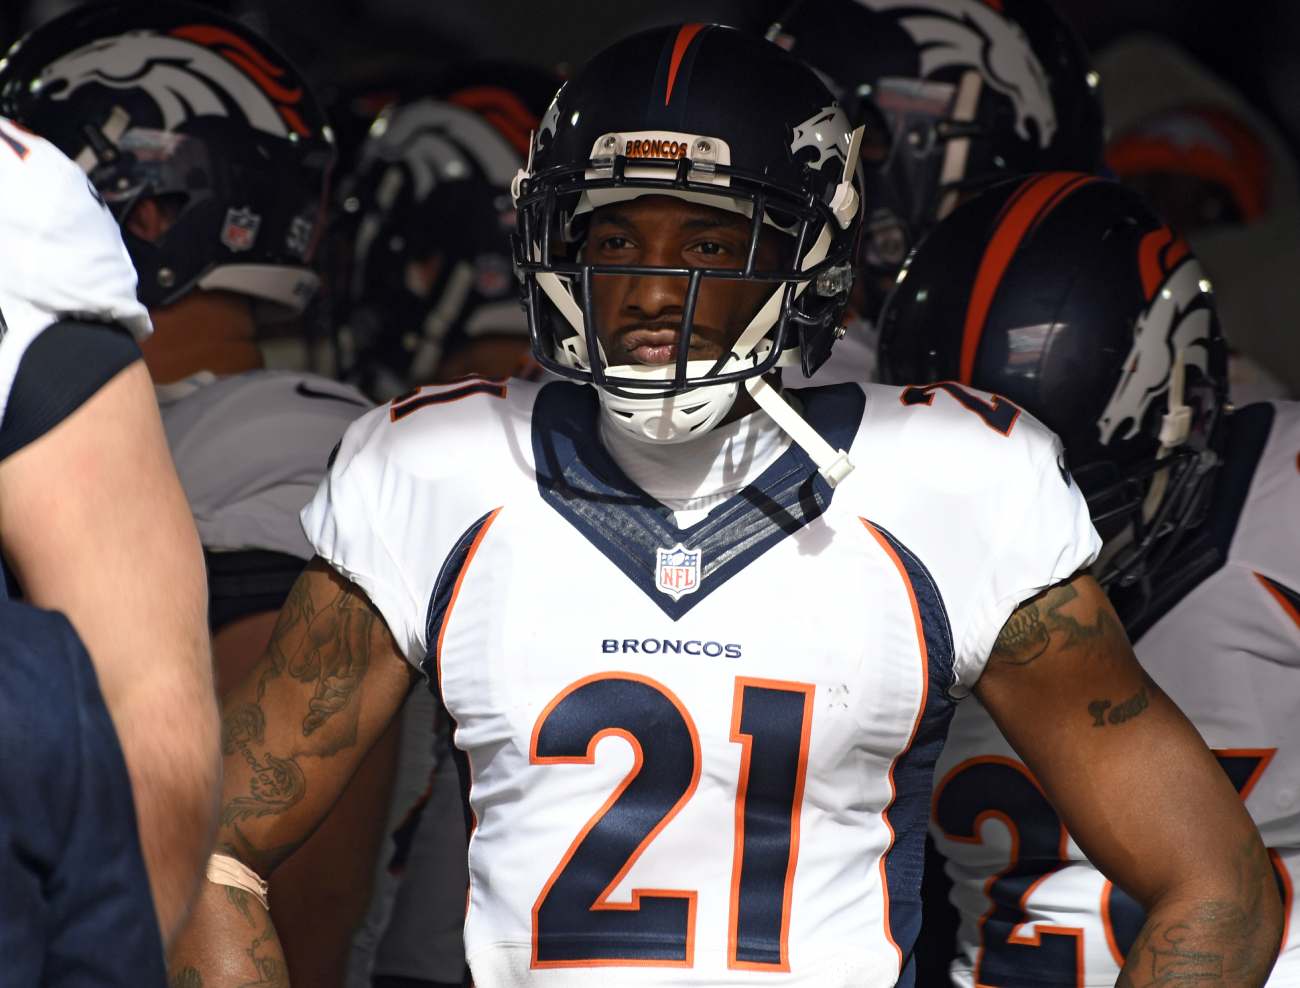 A 'little birdie' told Aqib Talib that more PED suspensions could be handed down soon.